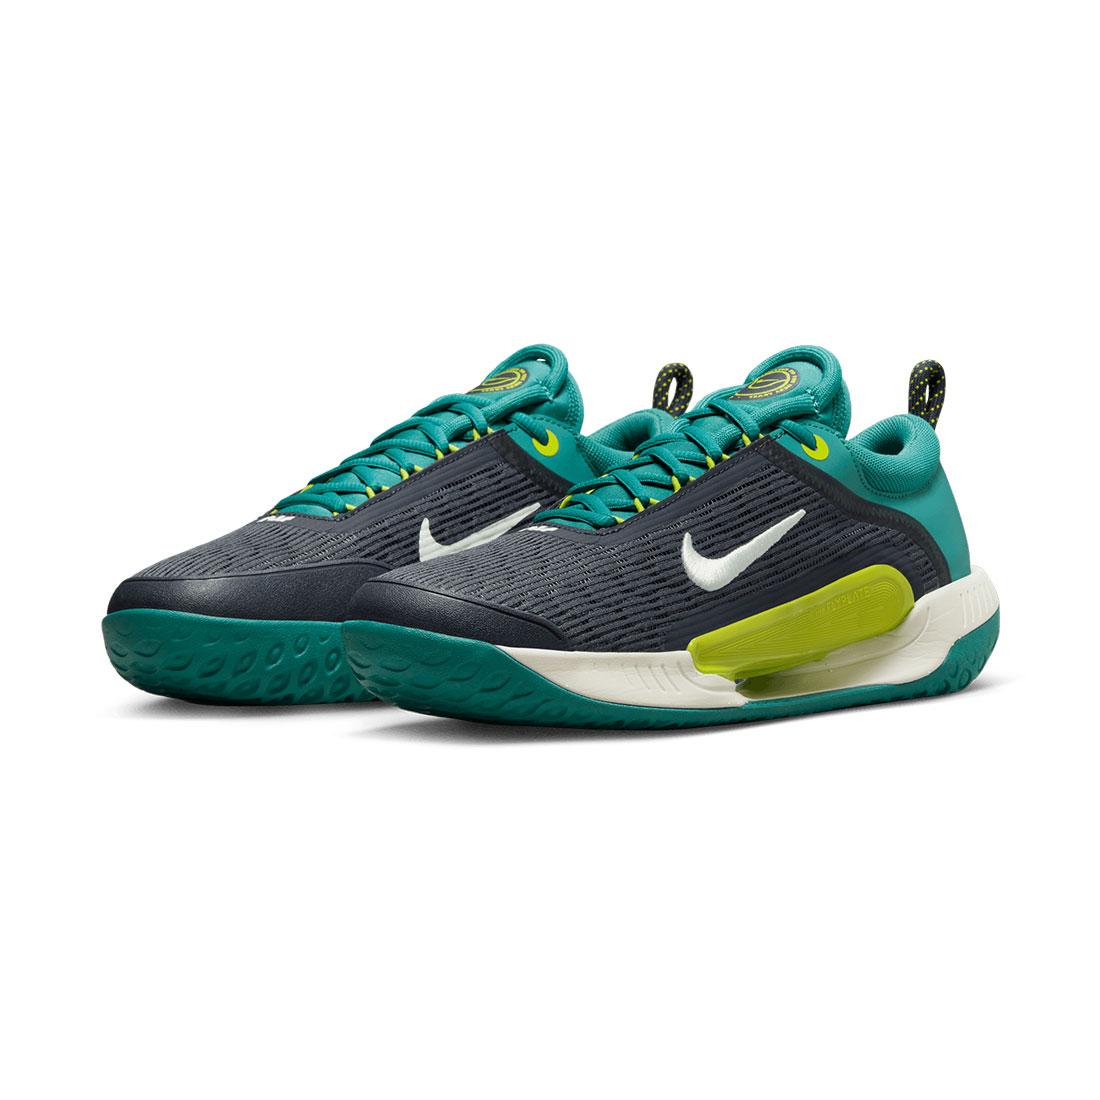 NikeCourt Men`s Air Zoom Court NXT Tennis Shoes Mineral Teal and Gridiron